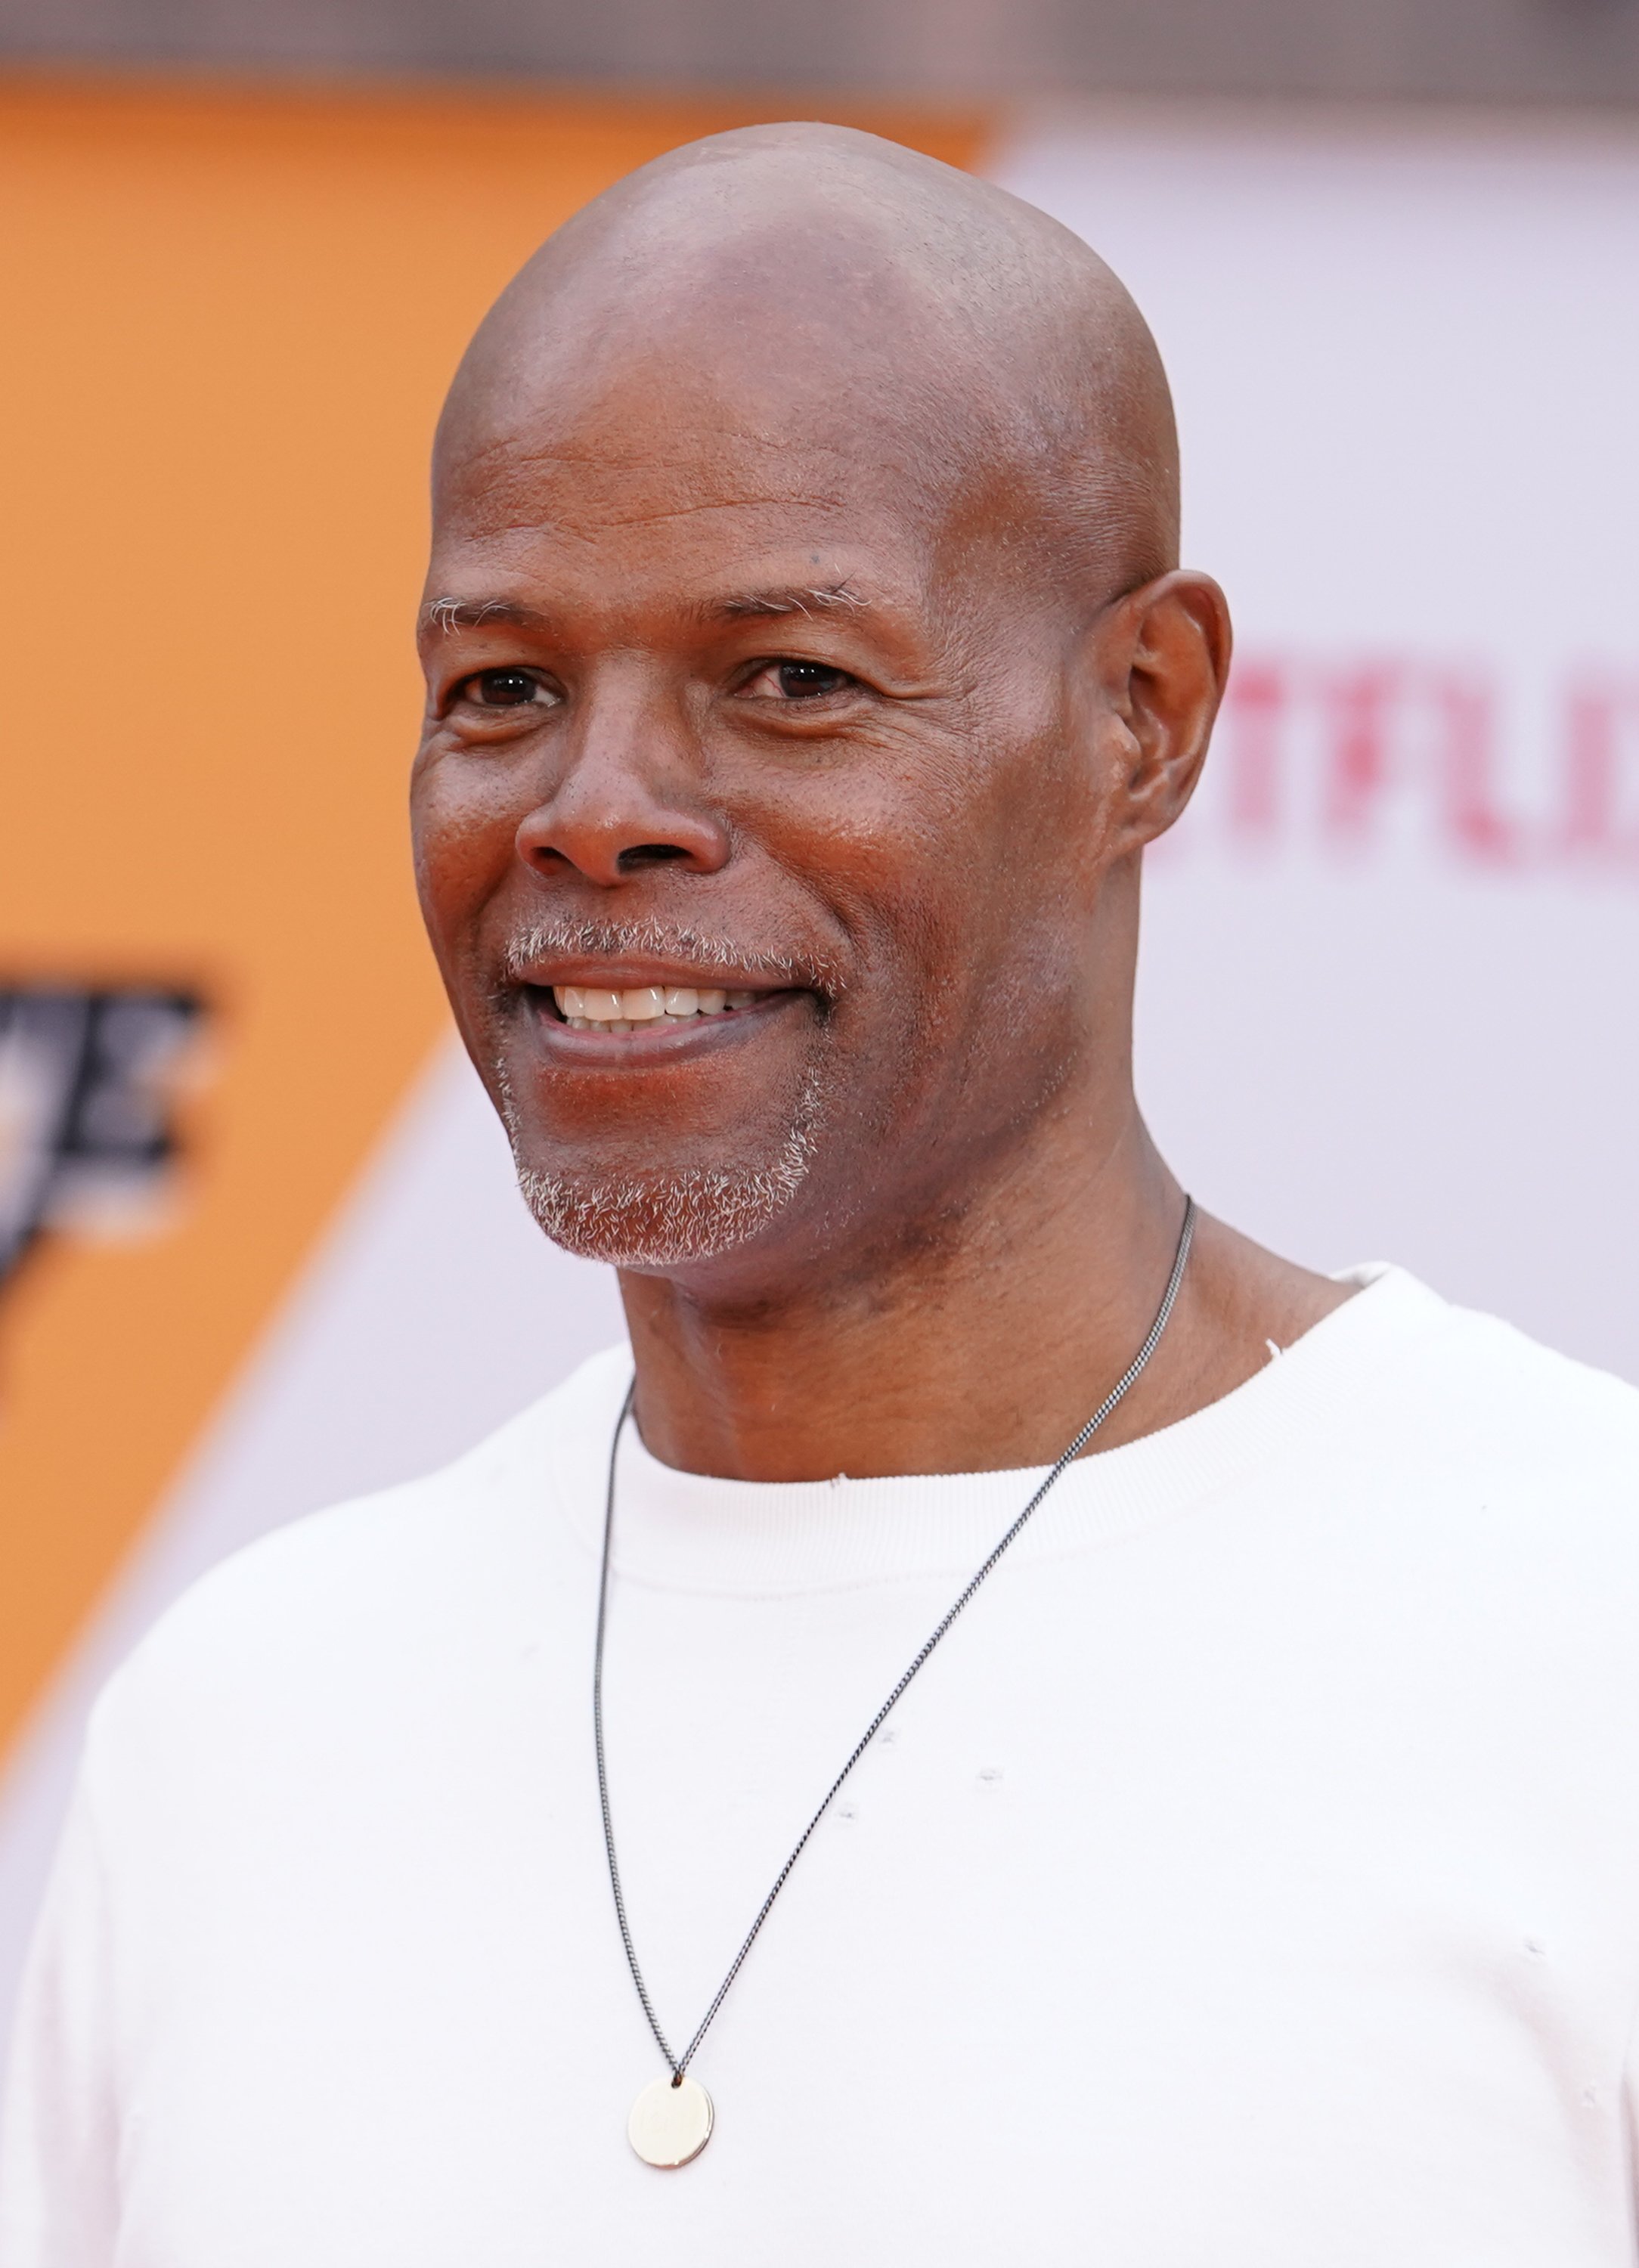 Keenen Ivory Wayans at the premiere of Netflix's "Dolemite Is My Name" on September 28, 2019, in California. | Source: Getty Images